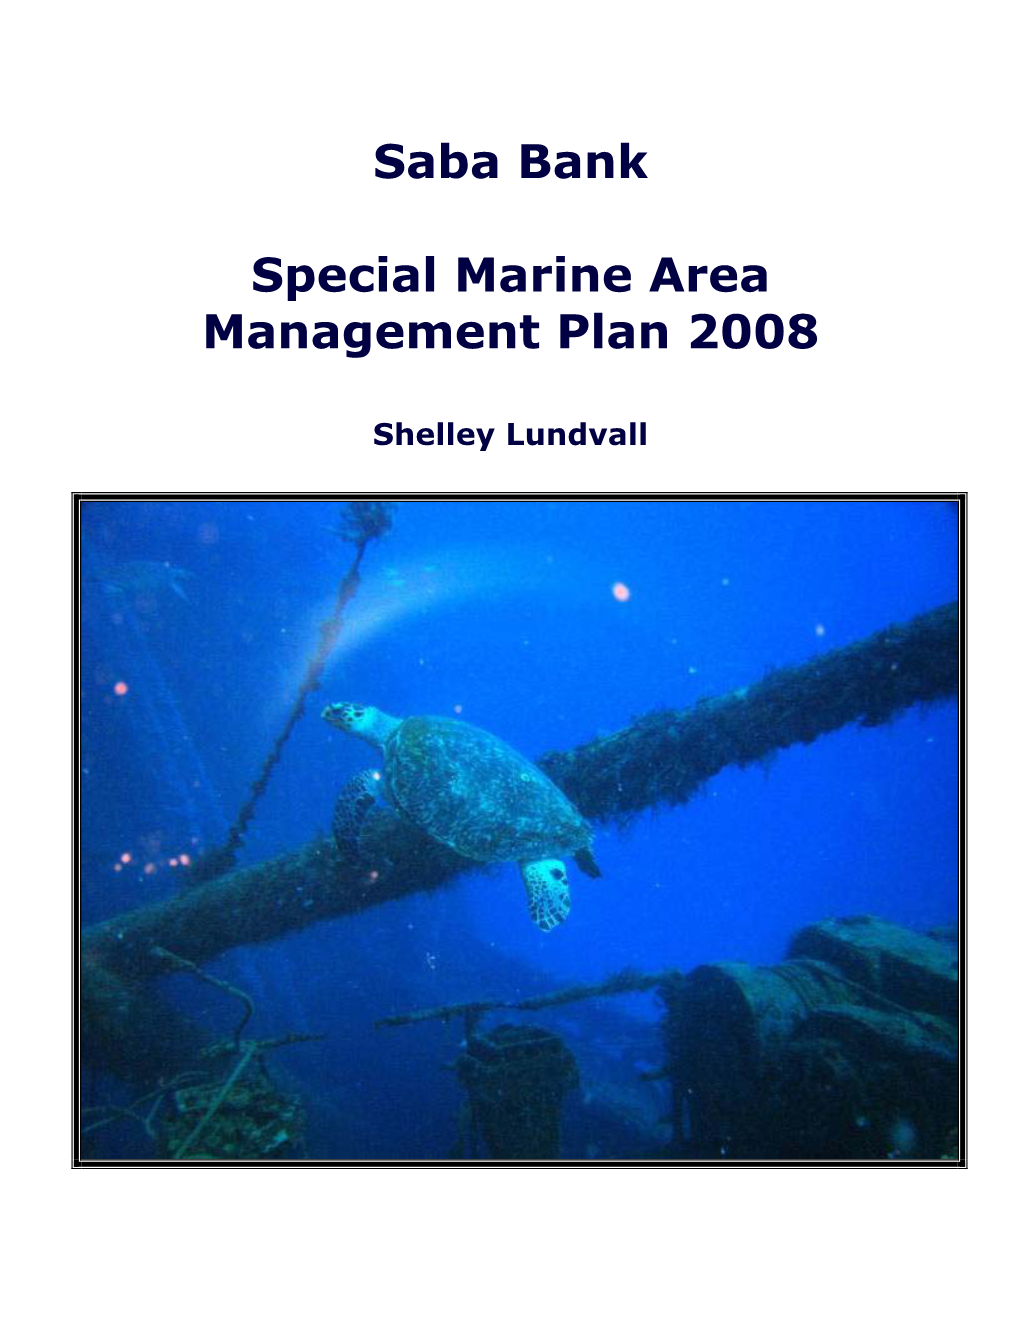 Saba Bank Special Marine Area Management Plan 2008 Cover Photo by Jan Den Dulk: Hawksbill Turtle on Unidentified Shipwreck in the Middle of the Saba Bank